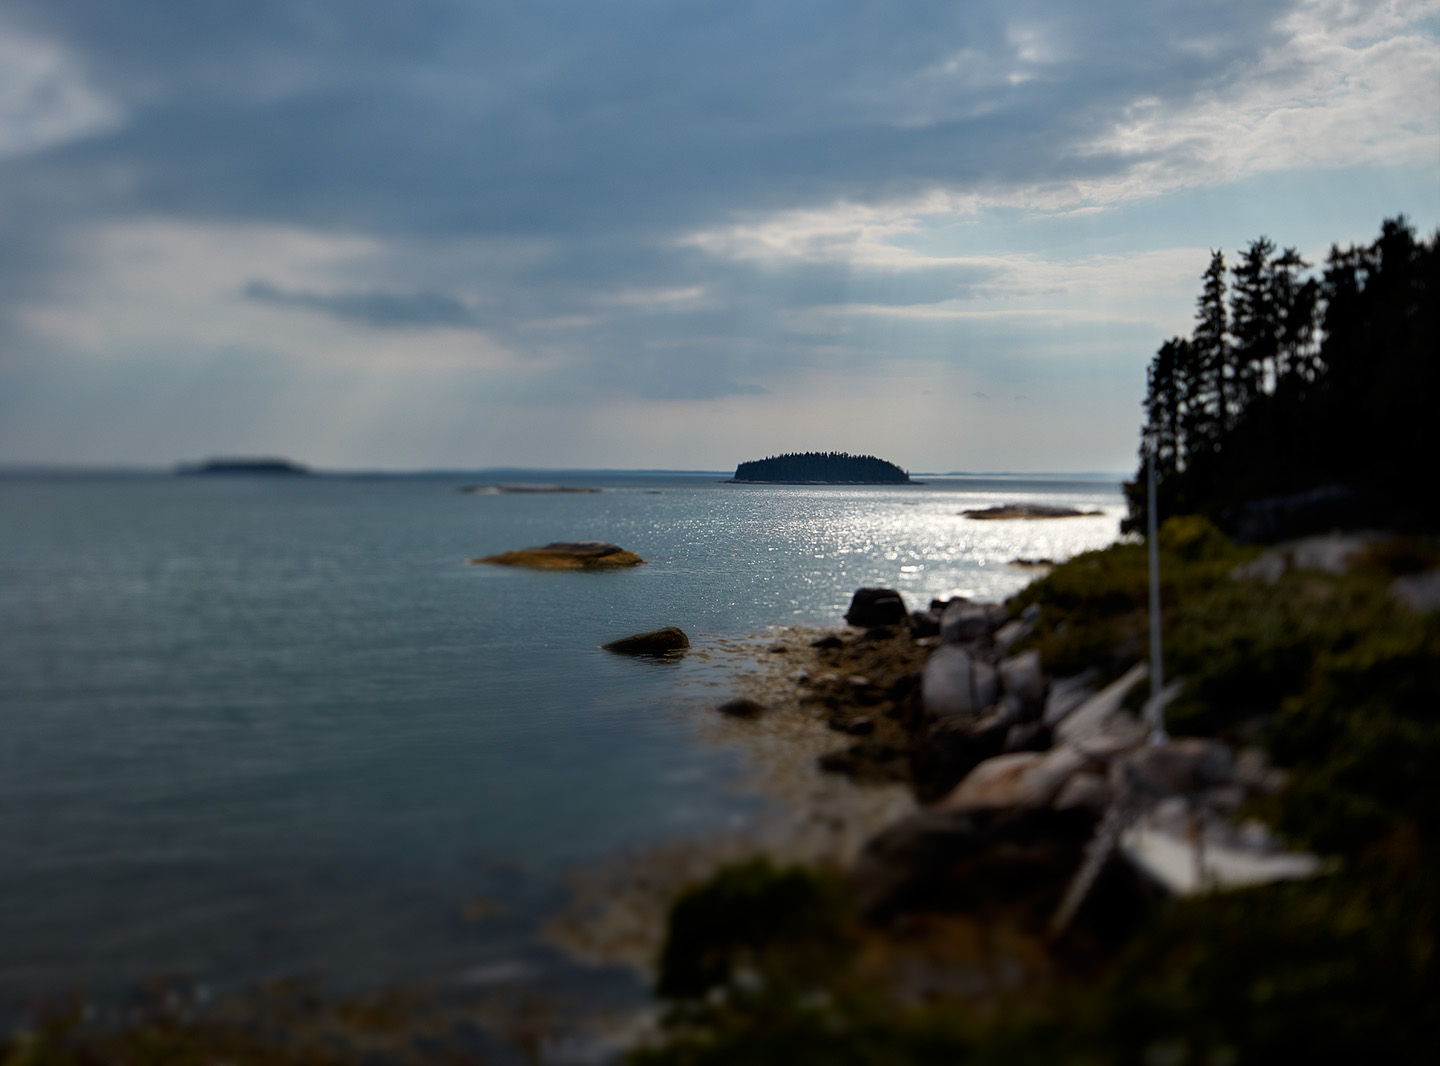 Second Island and Penobscot Bay. Canon 5DS R with the 45mm TSE lens. Stonington, ME. August, 2015.